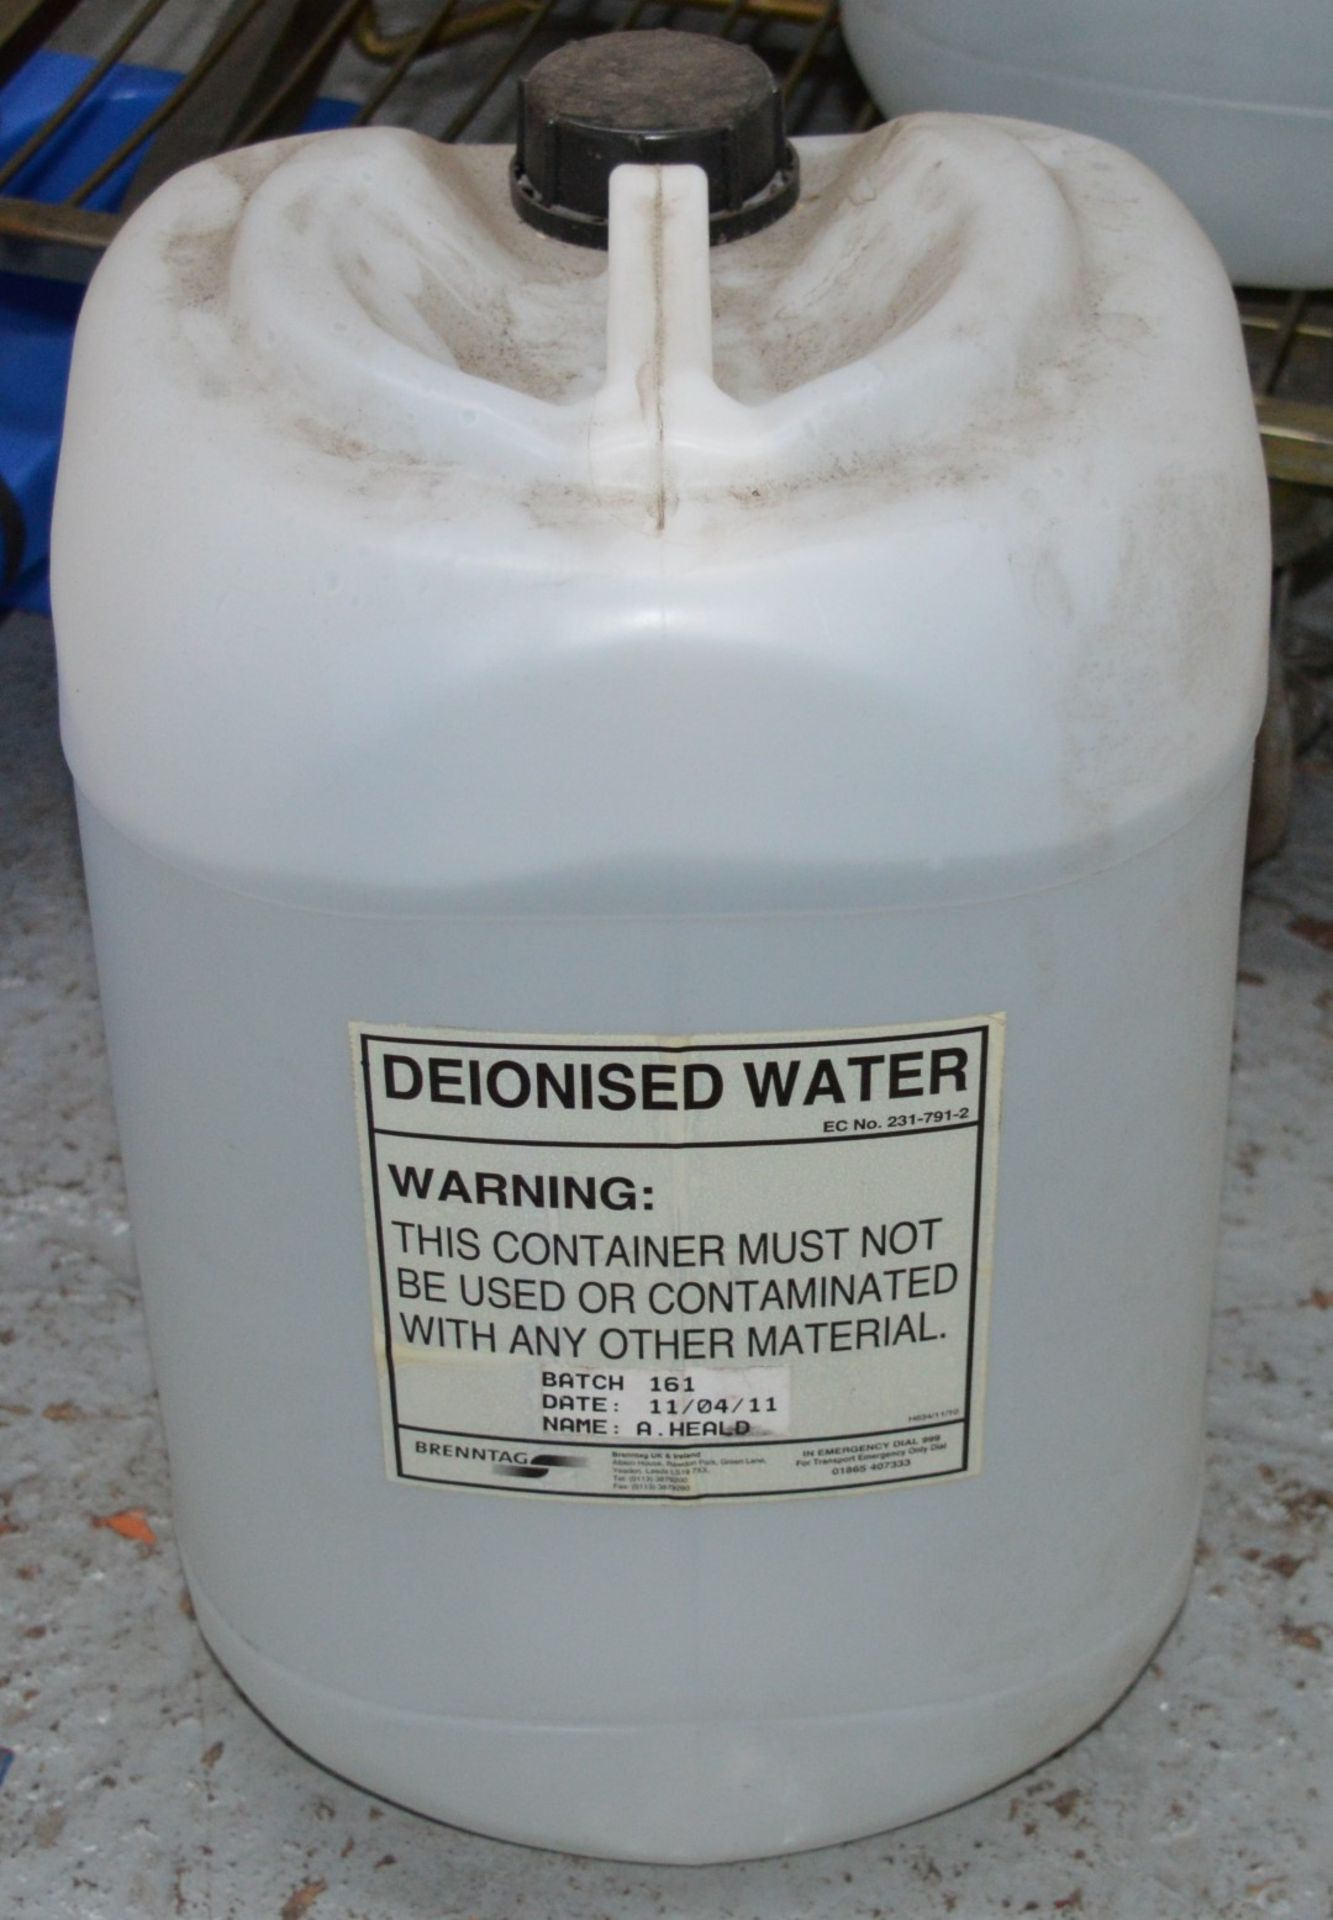 2 x Deionised Water Containers - 25 Litre Containers - Commercially Used For Car Batteries or